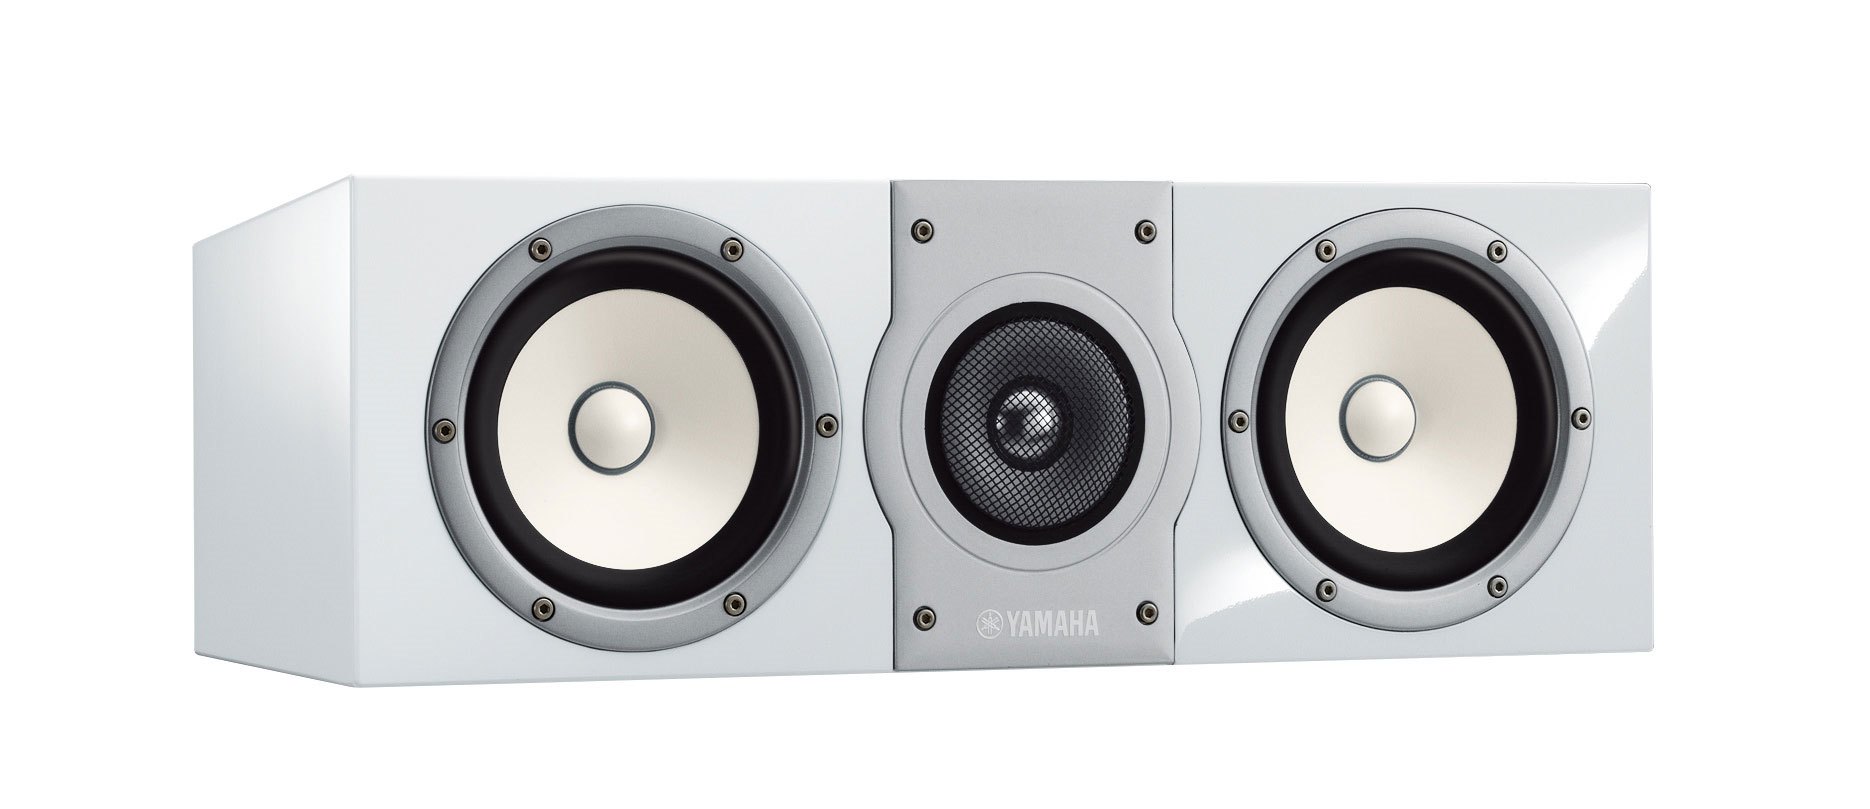 NS-C901 - Overview - Speaker Systems - Audio & Visual - Products 